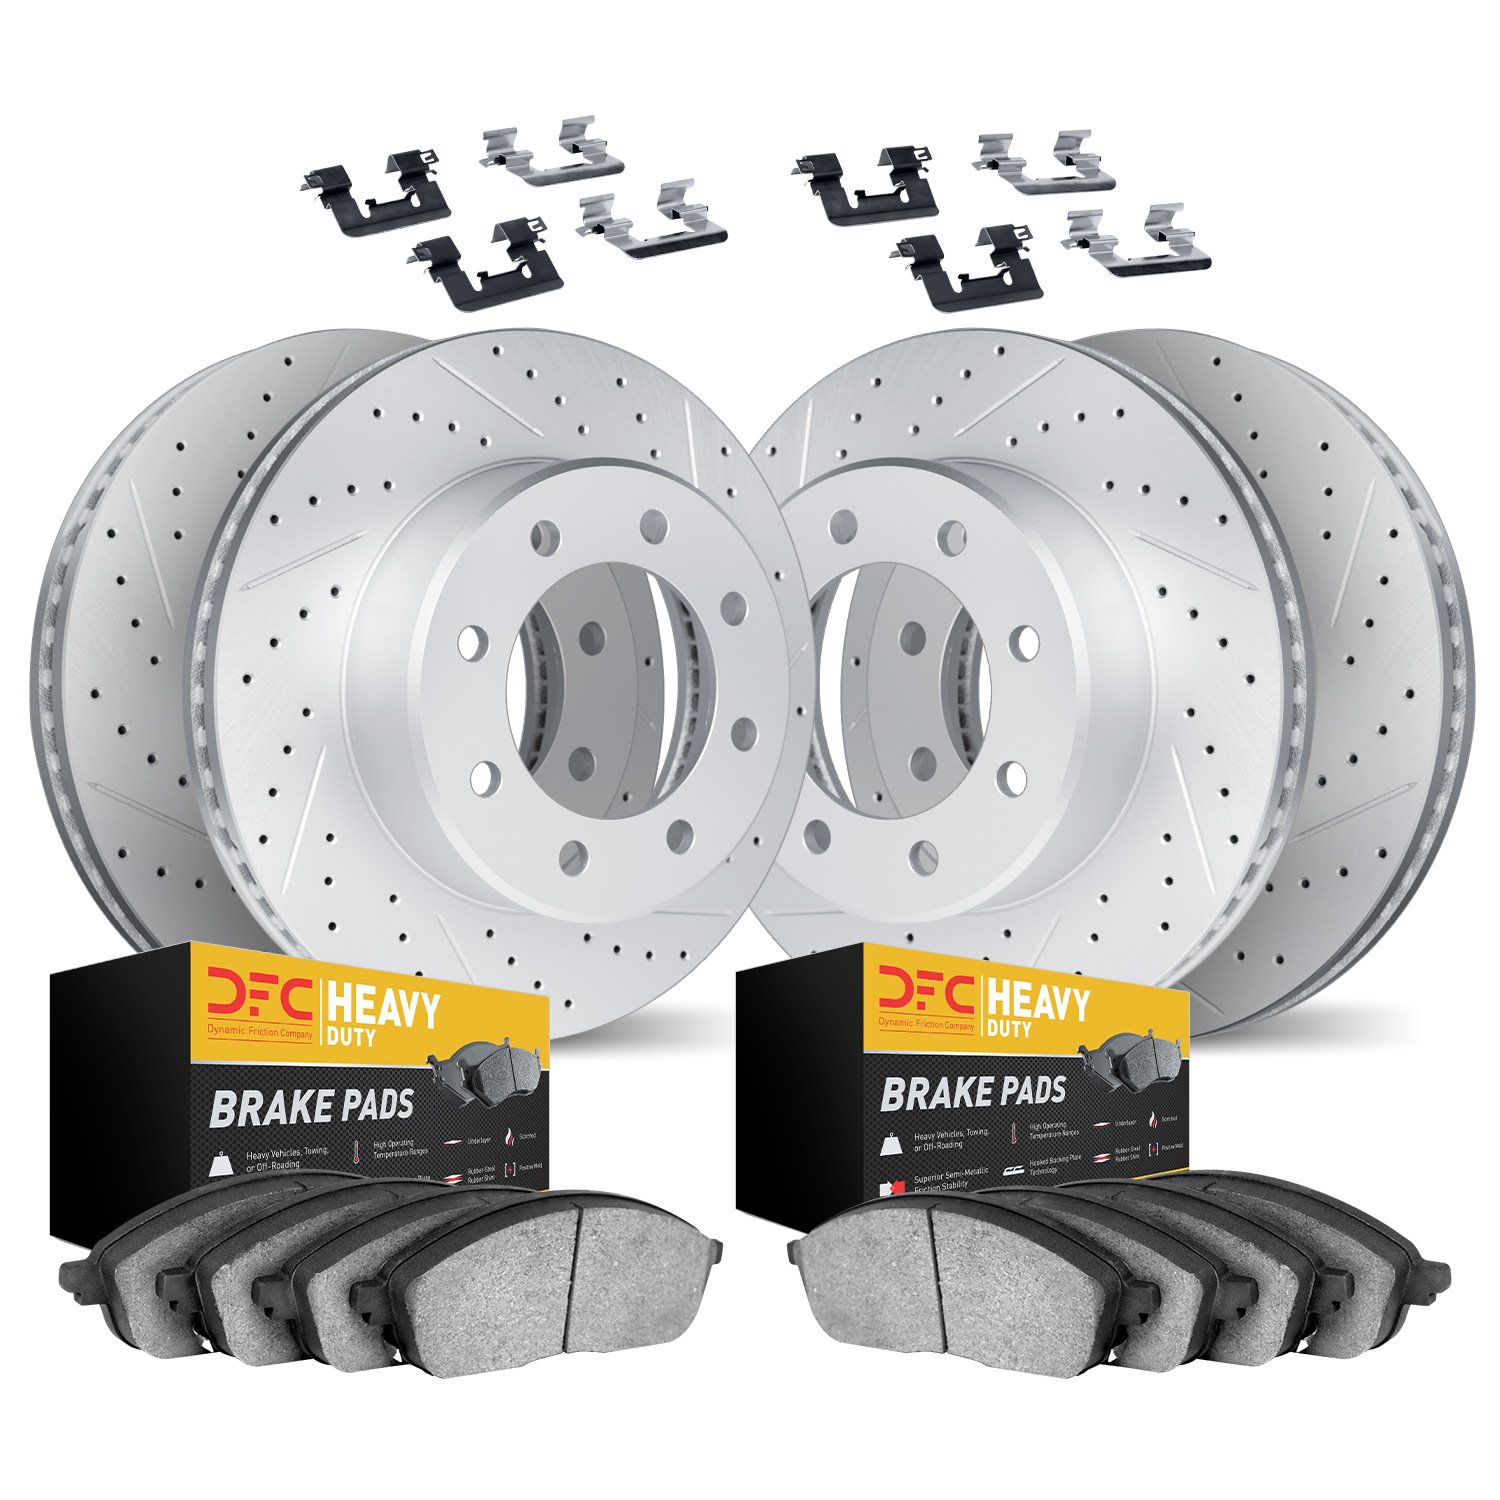 2214-99033 Geoperformance Drilled/Slotted Rotors w/Heavy-Duty Pads Kit & Hardware, 1999-2000 Ford/Lincoln/Mercury/Mazda, Positio